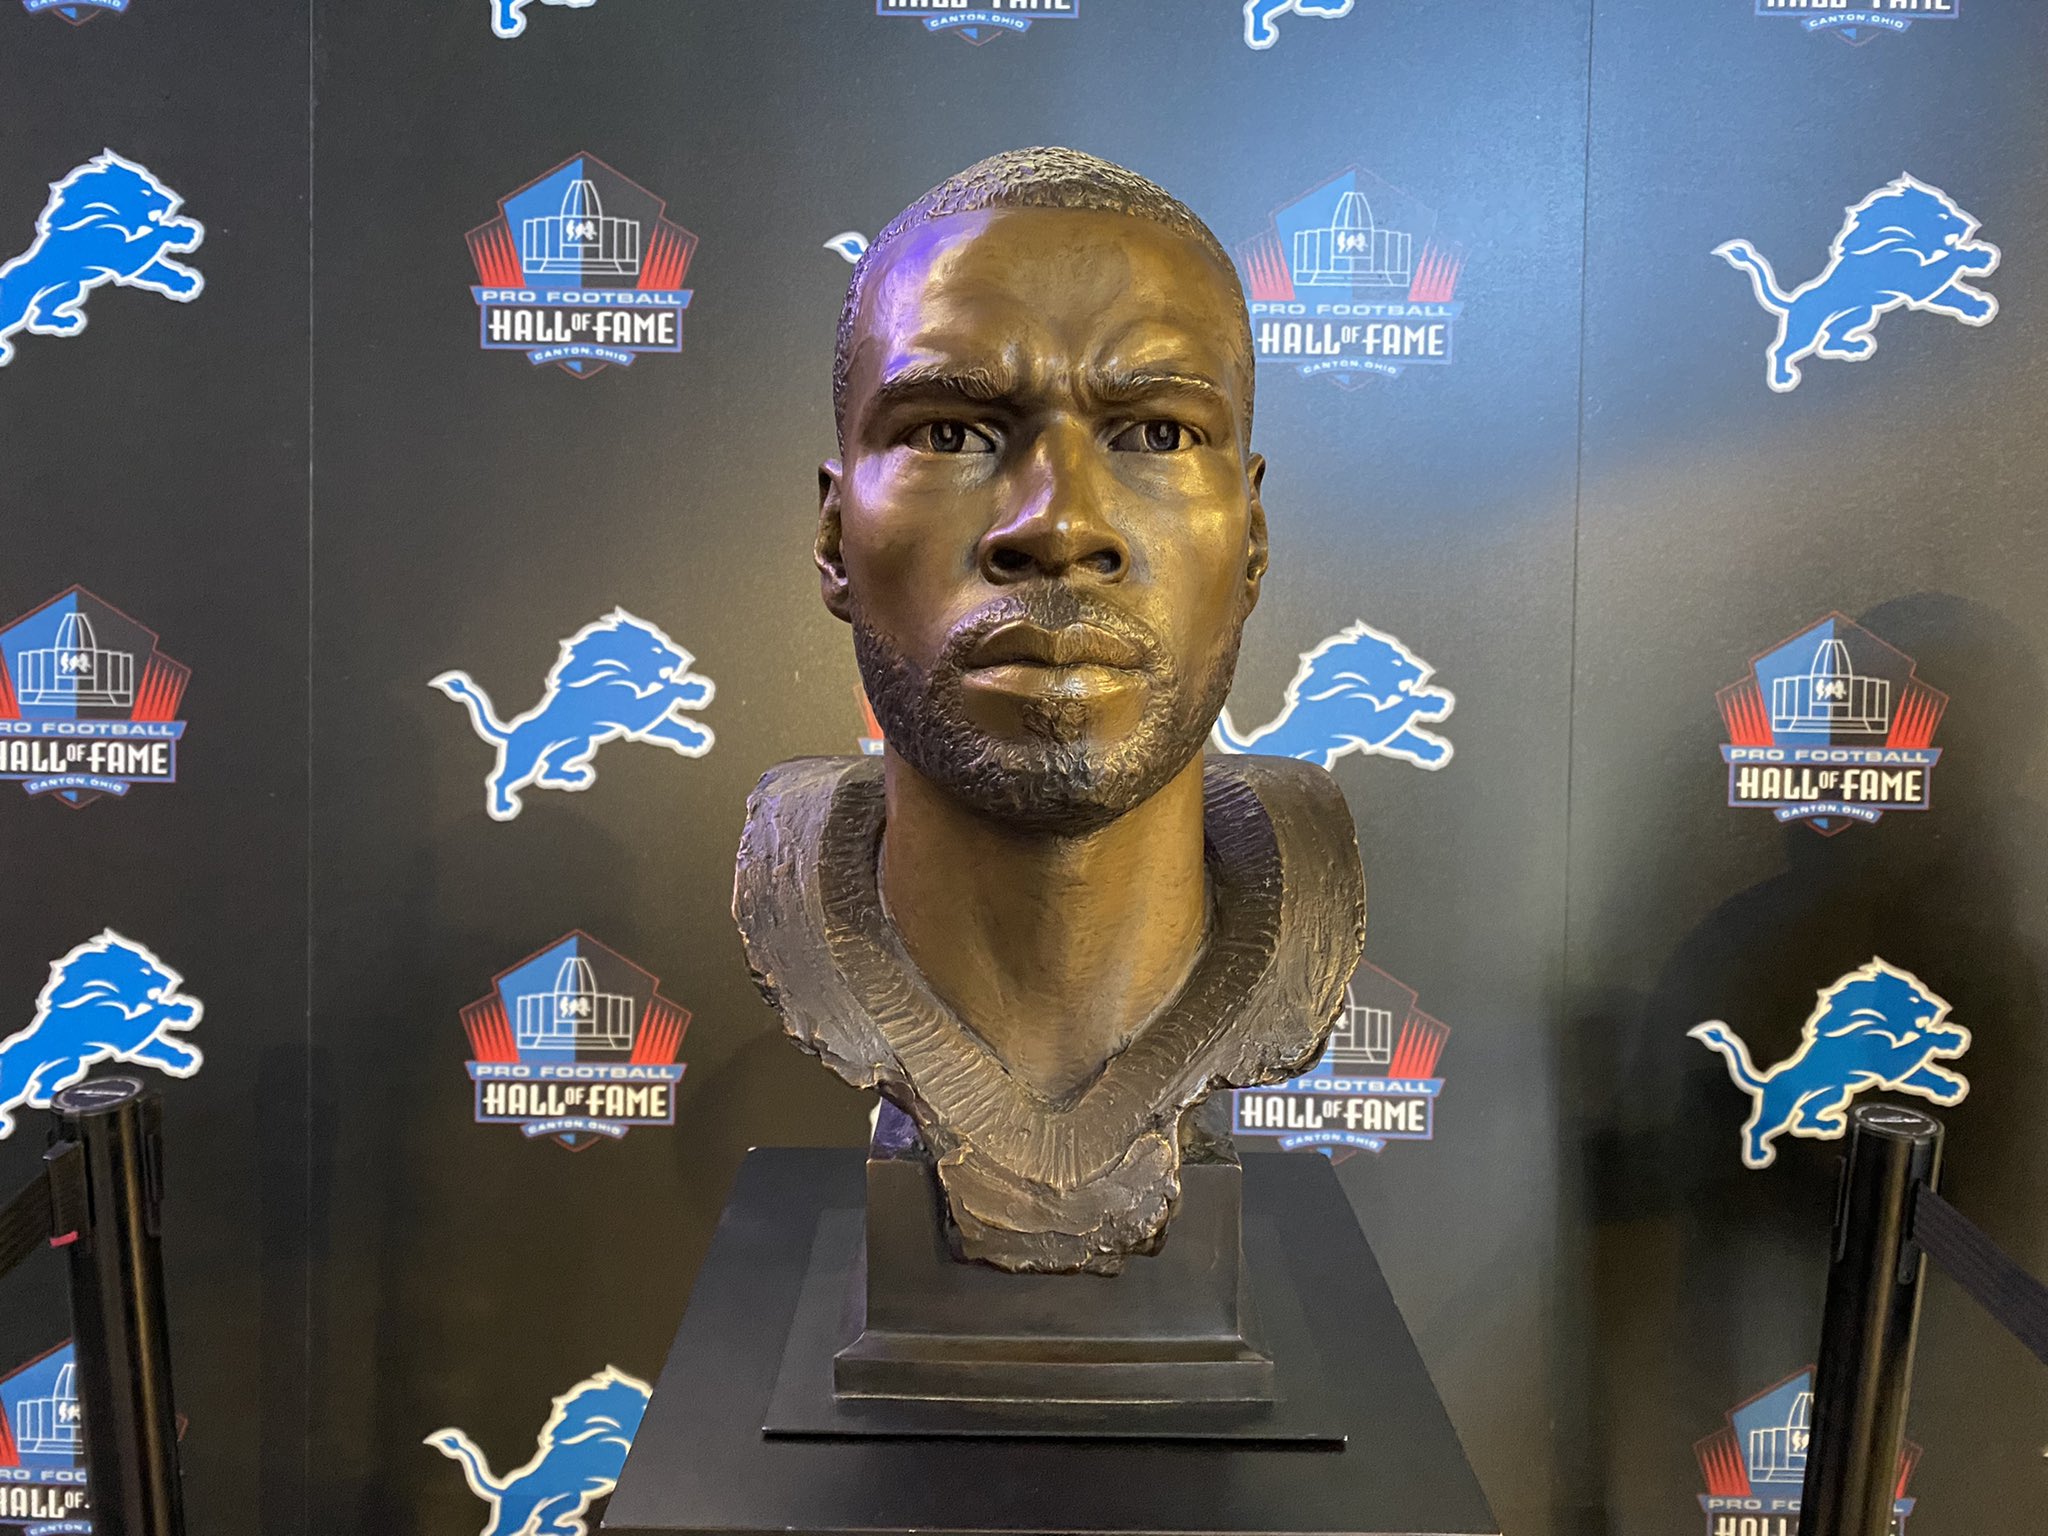 Does Calvin Johnson Belong in the Hall of Fame?